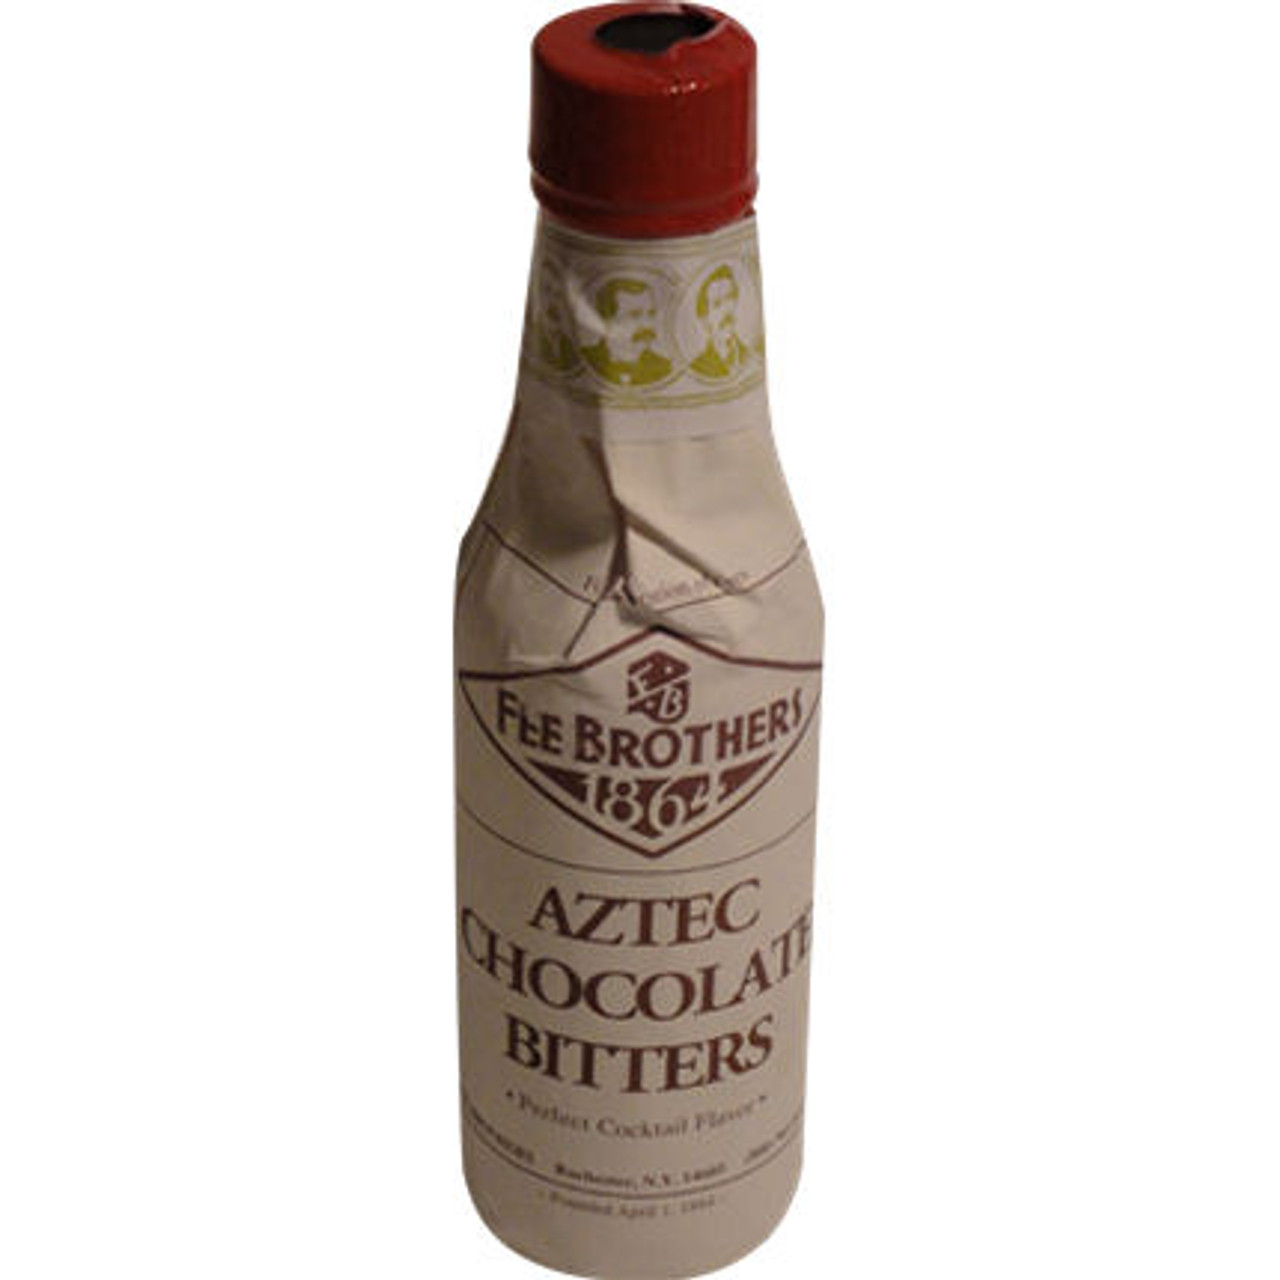 Fee Brothers Aztec Chocolate Bitters 5oz.